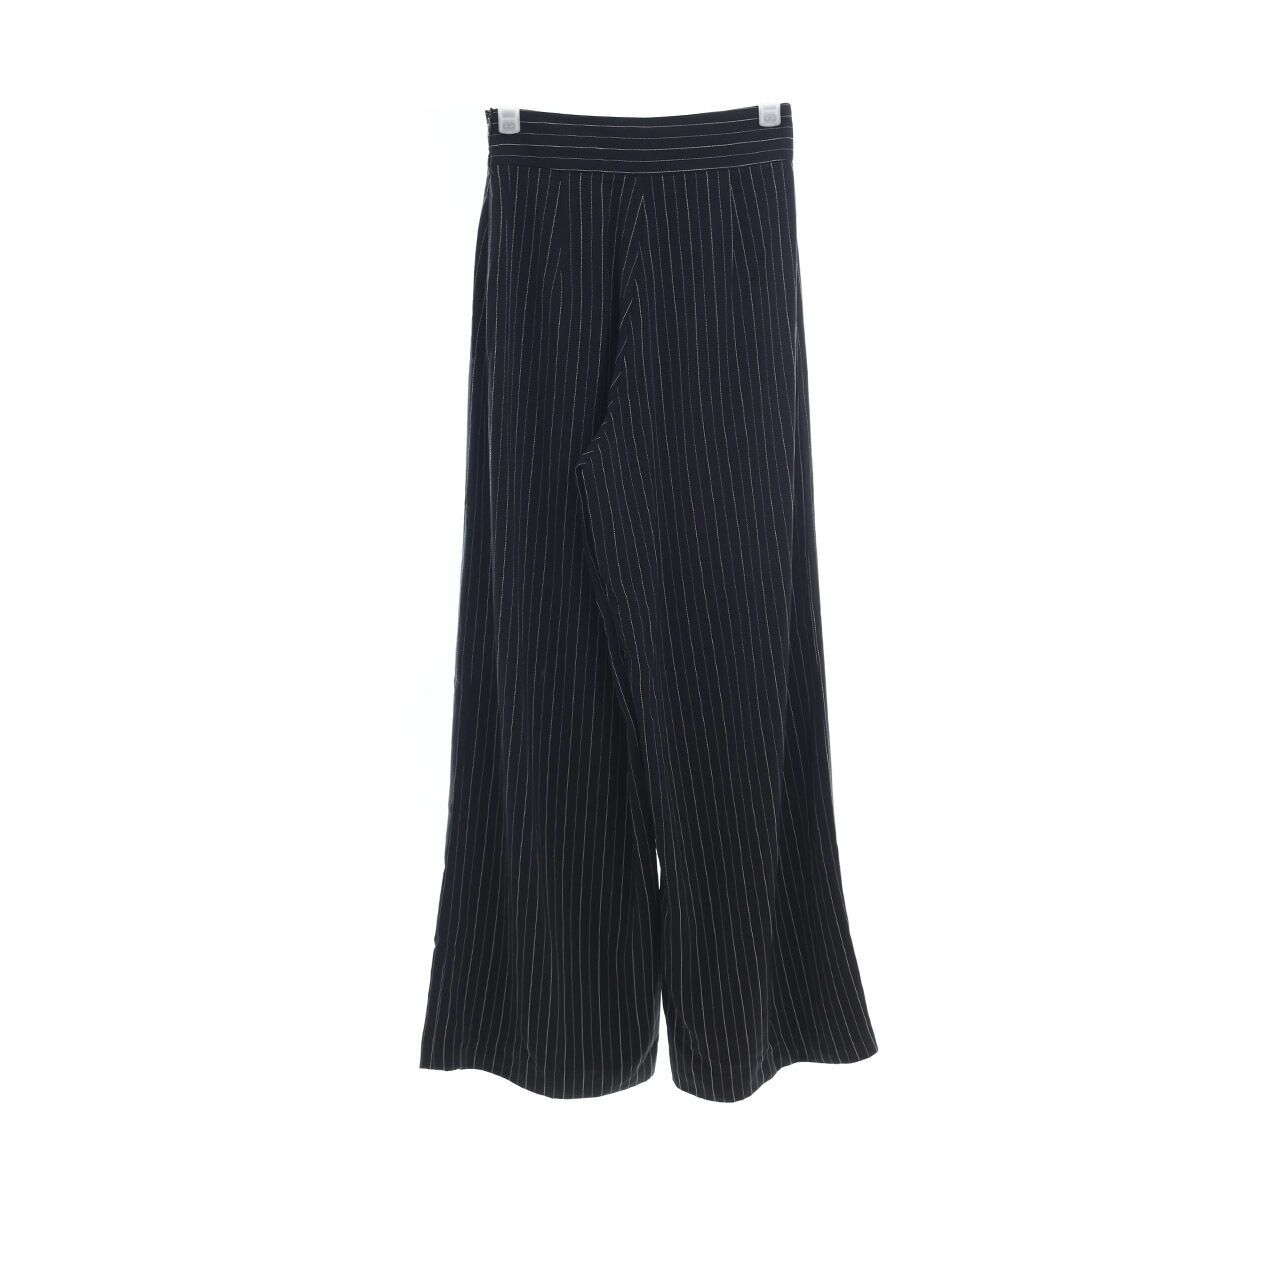 ANG STUDIO Black Striped Trousers